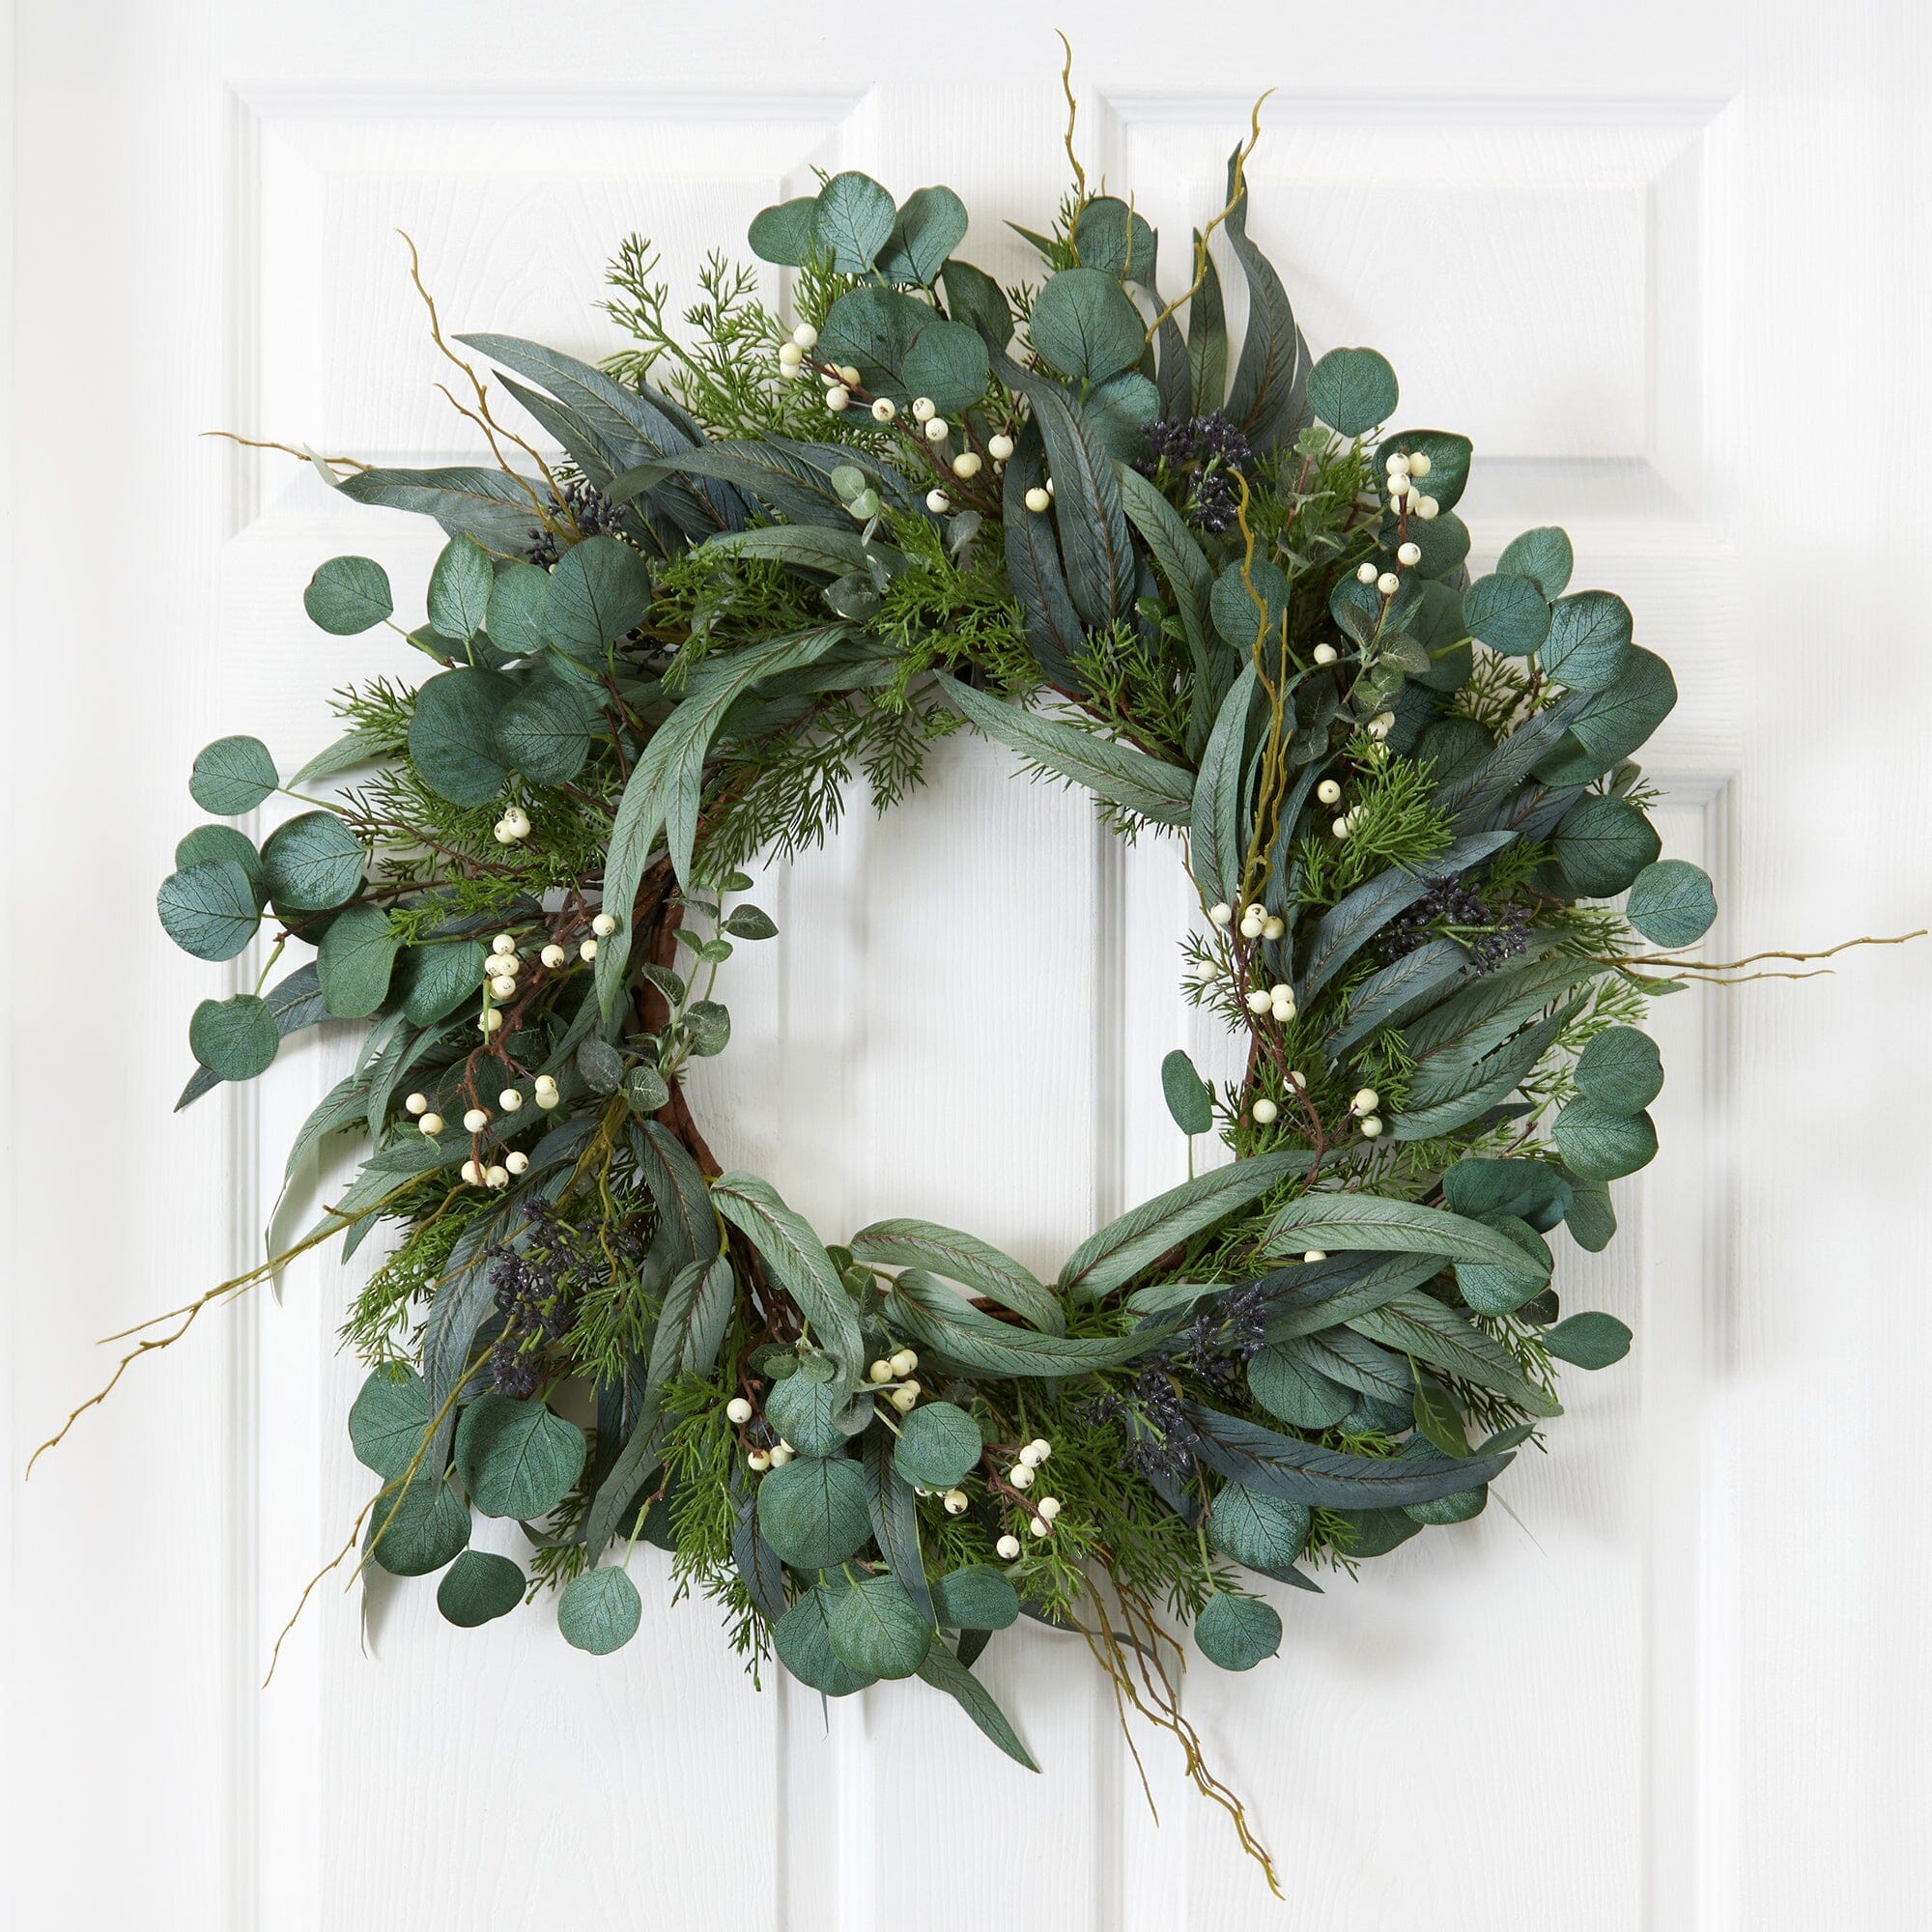 24” Eucalyptus and Mixed Greens Artificial Wreath | Nearly Natural